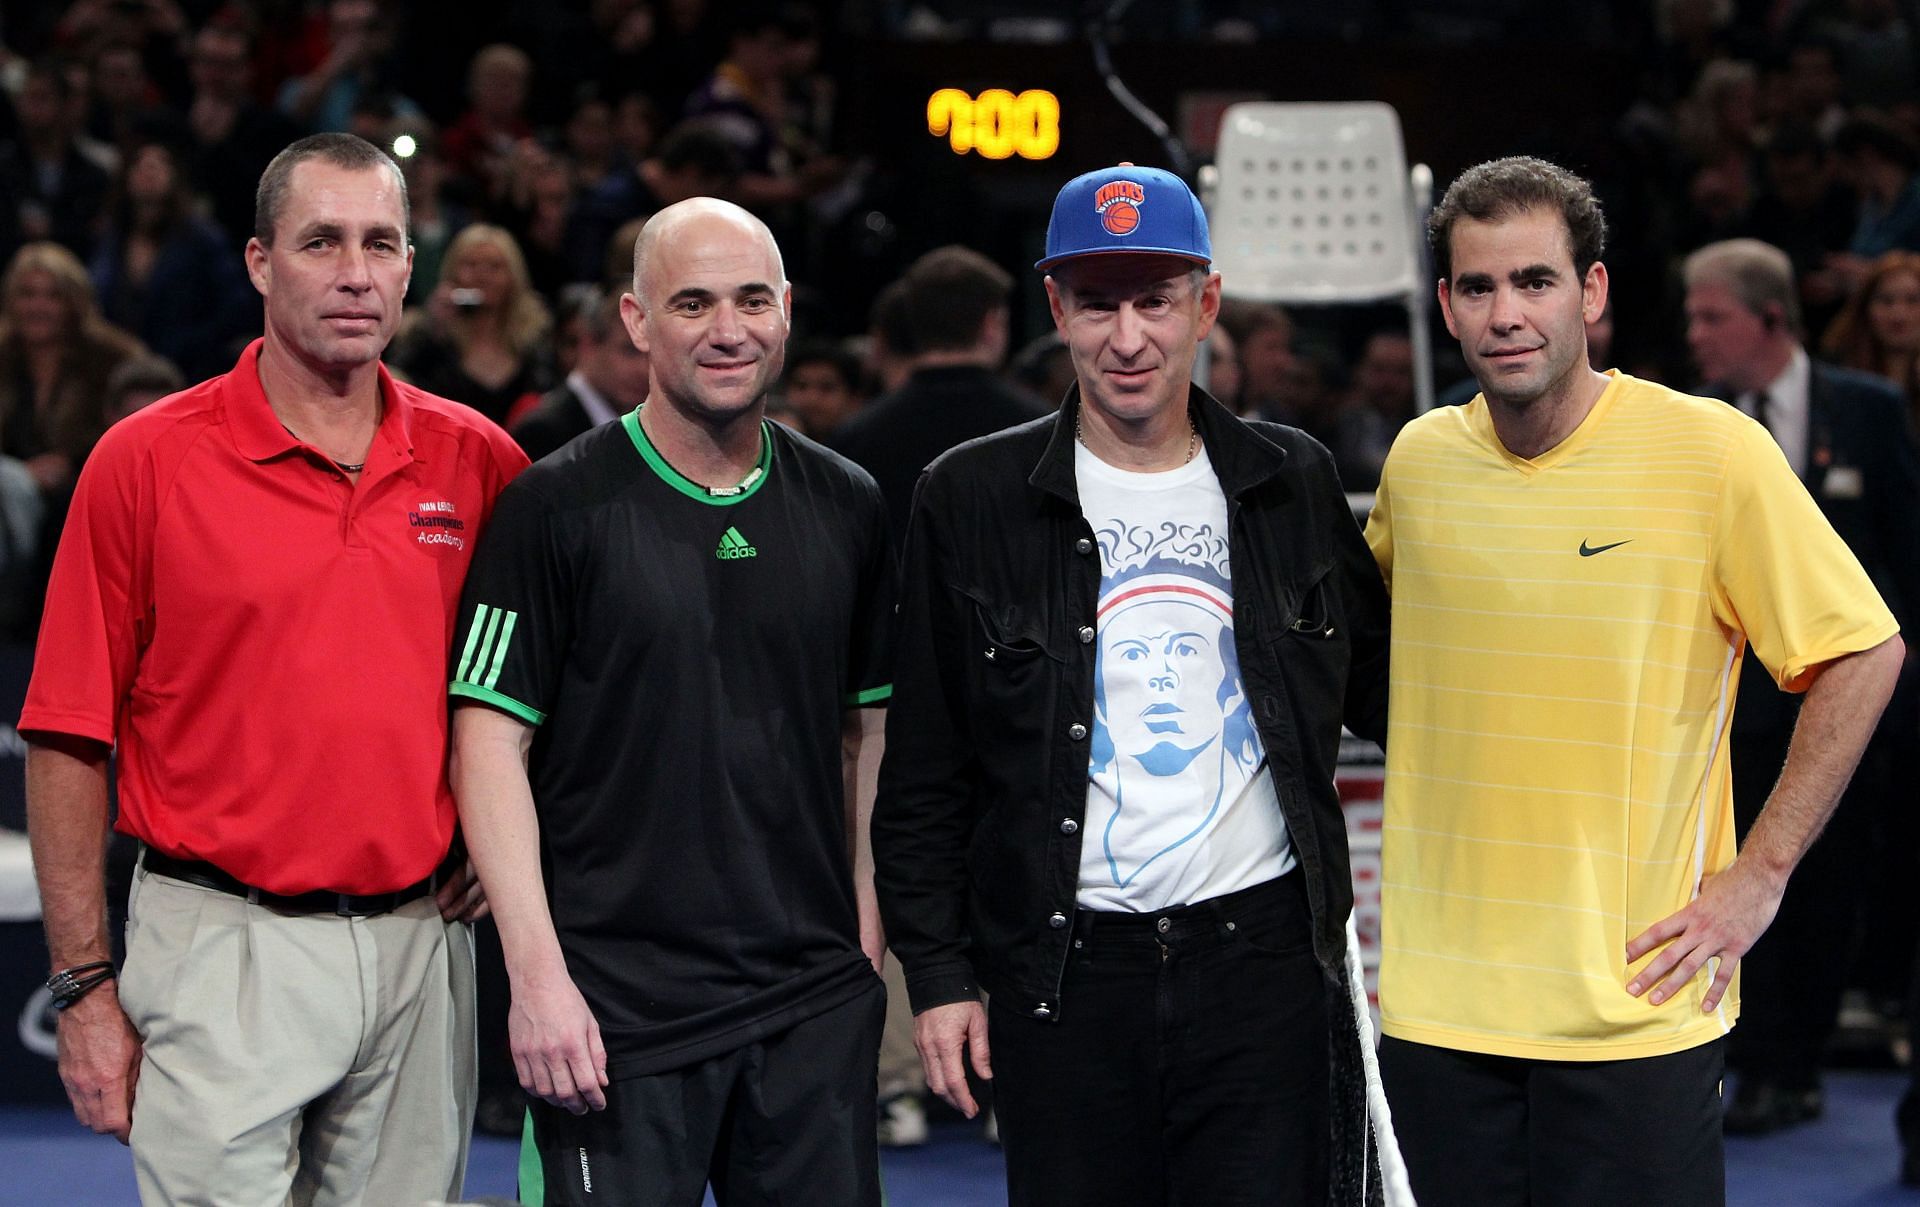 Andre Agassi and Pete Sampras with Ivan Lendl and John McEnroe